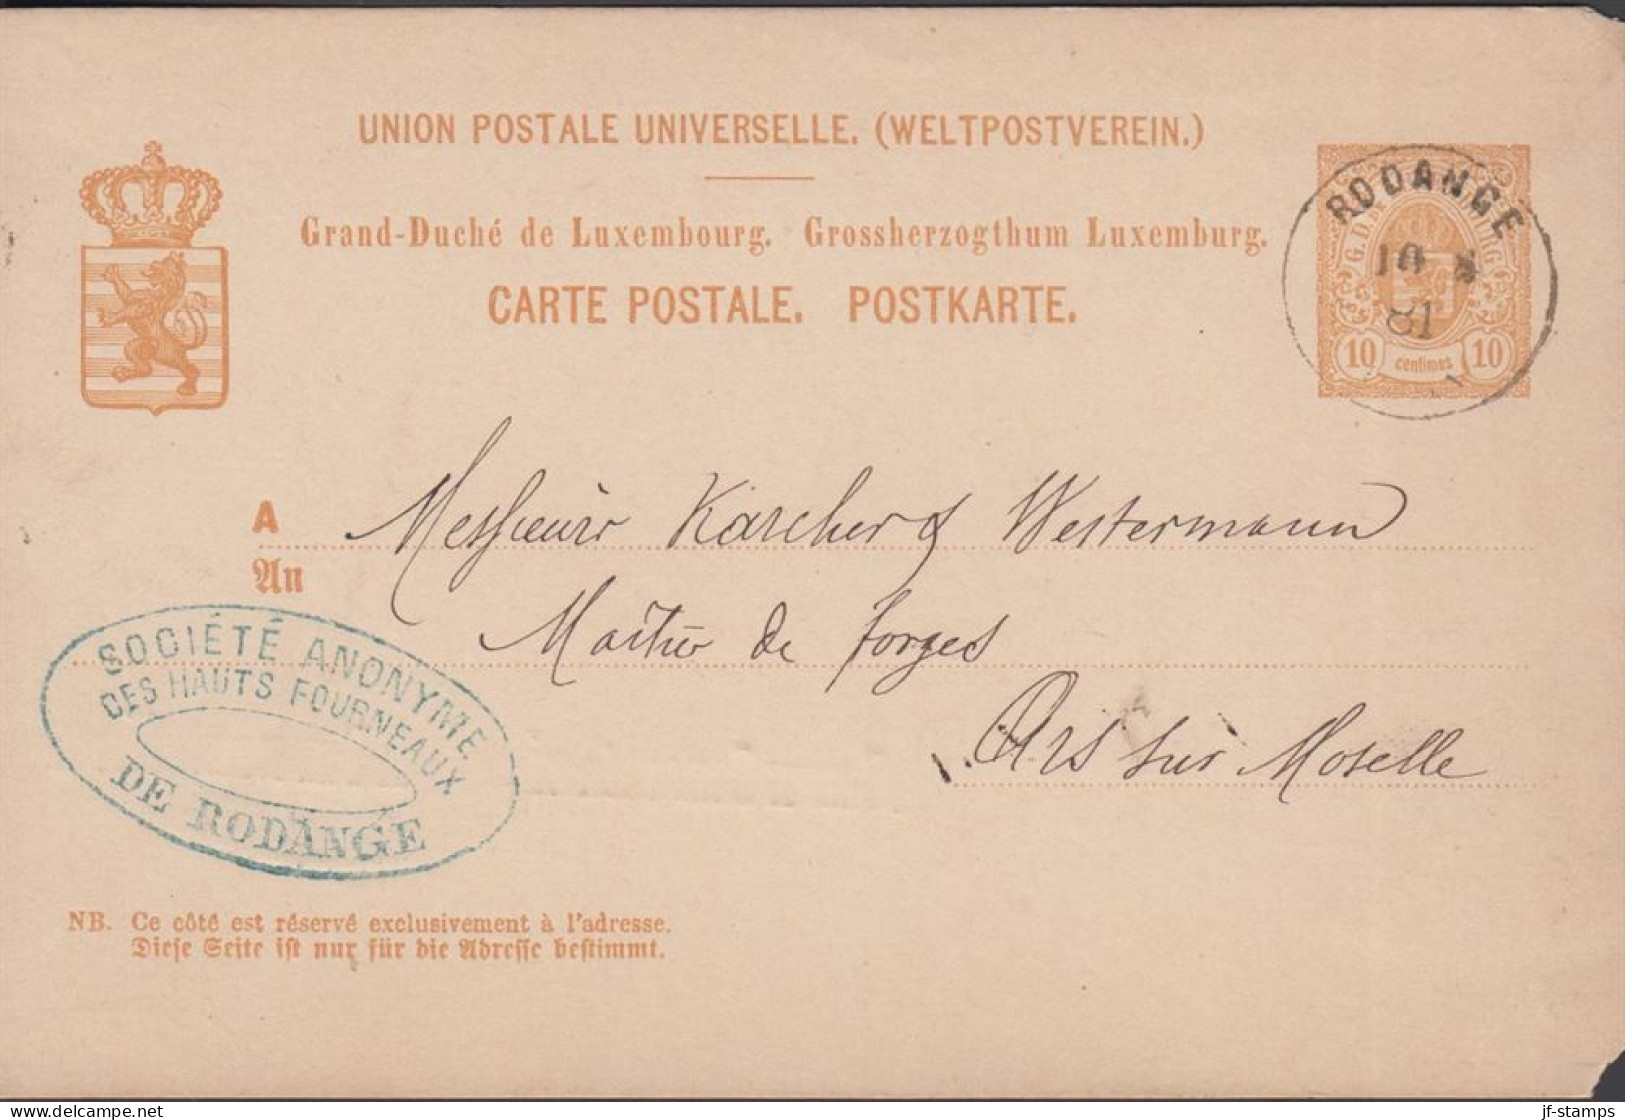 1881. LUXEMBOURG. 10 CENTIMES CARTE POSTALE Cancelled With LUXUS Cancel RODANGE 10 8 81. Sender SOCIETE AN... - JF445178 - Stamped Stationery